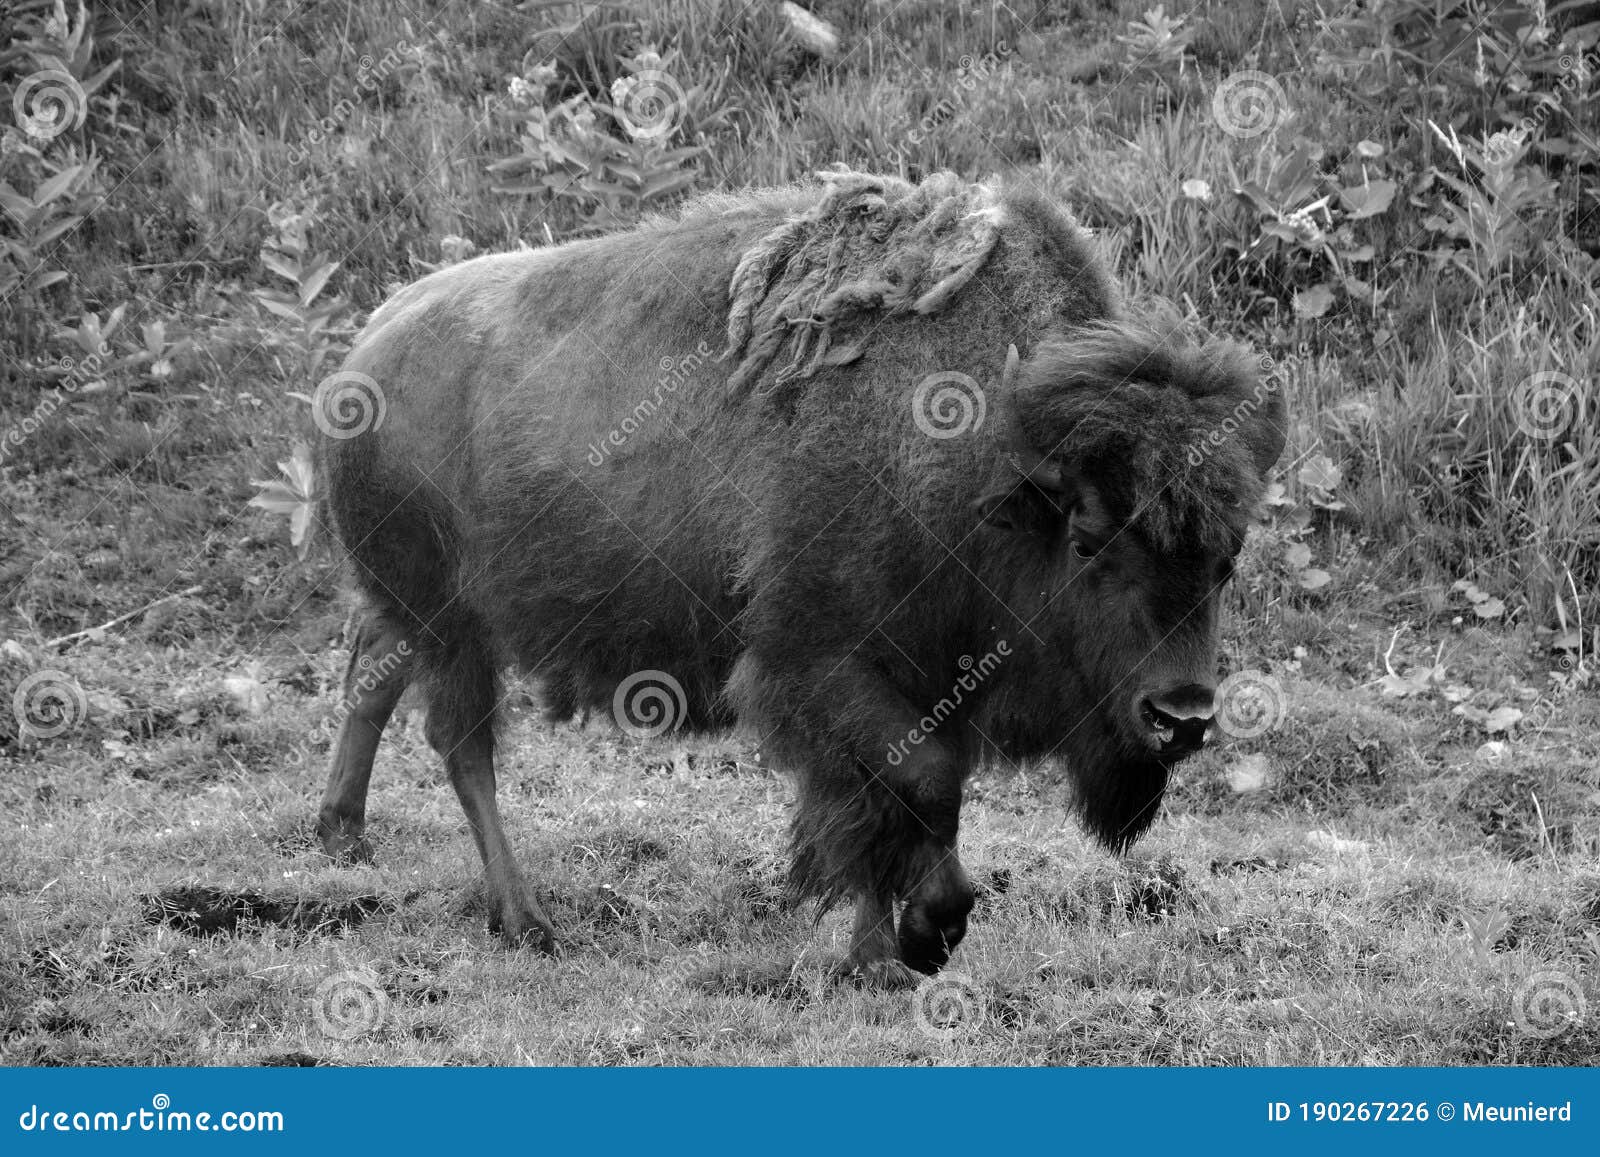 bison is large, even-toed ungulates